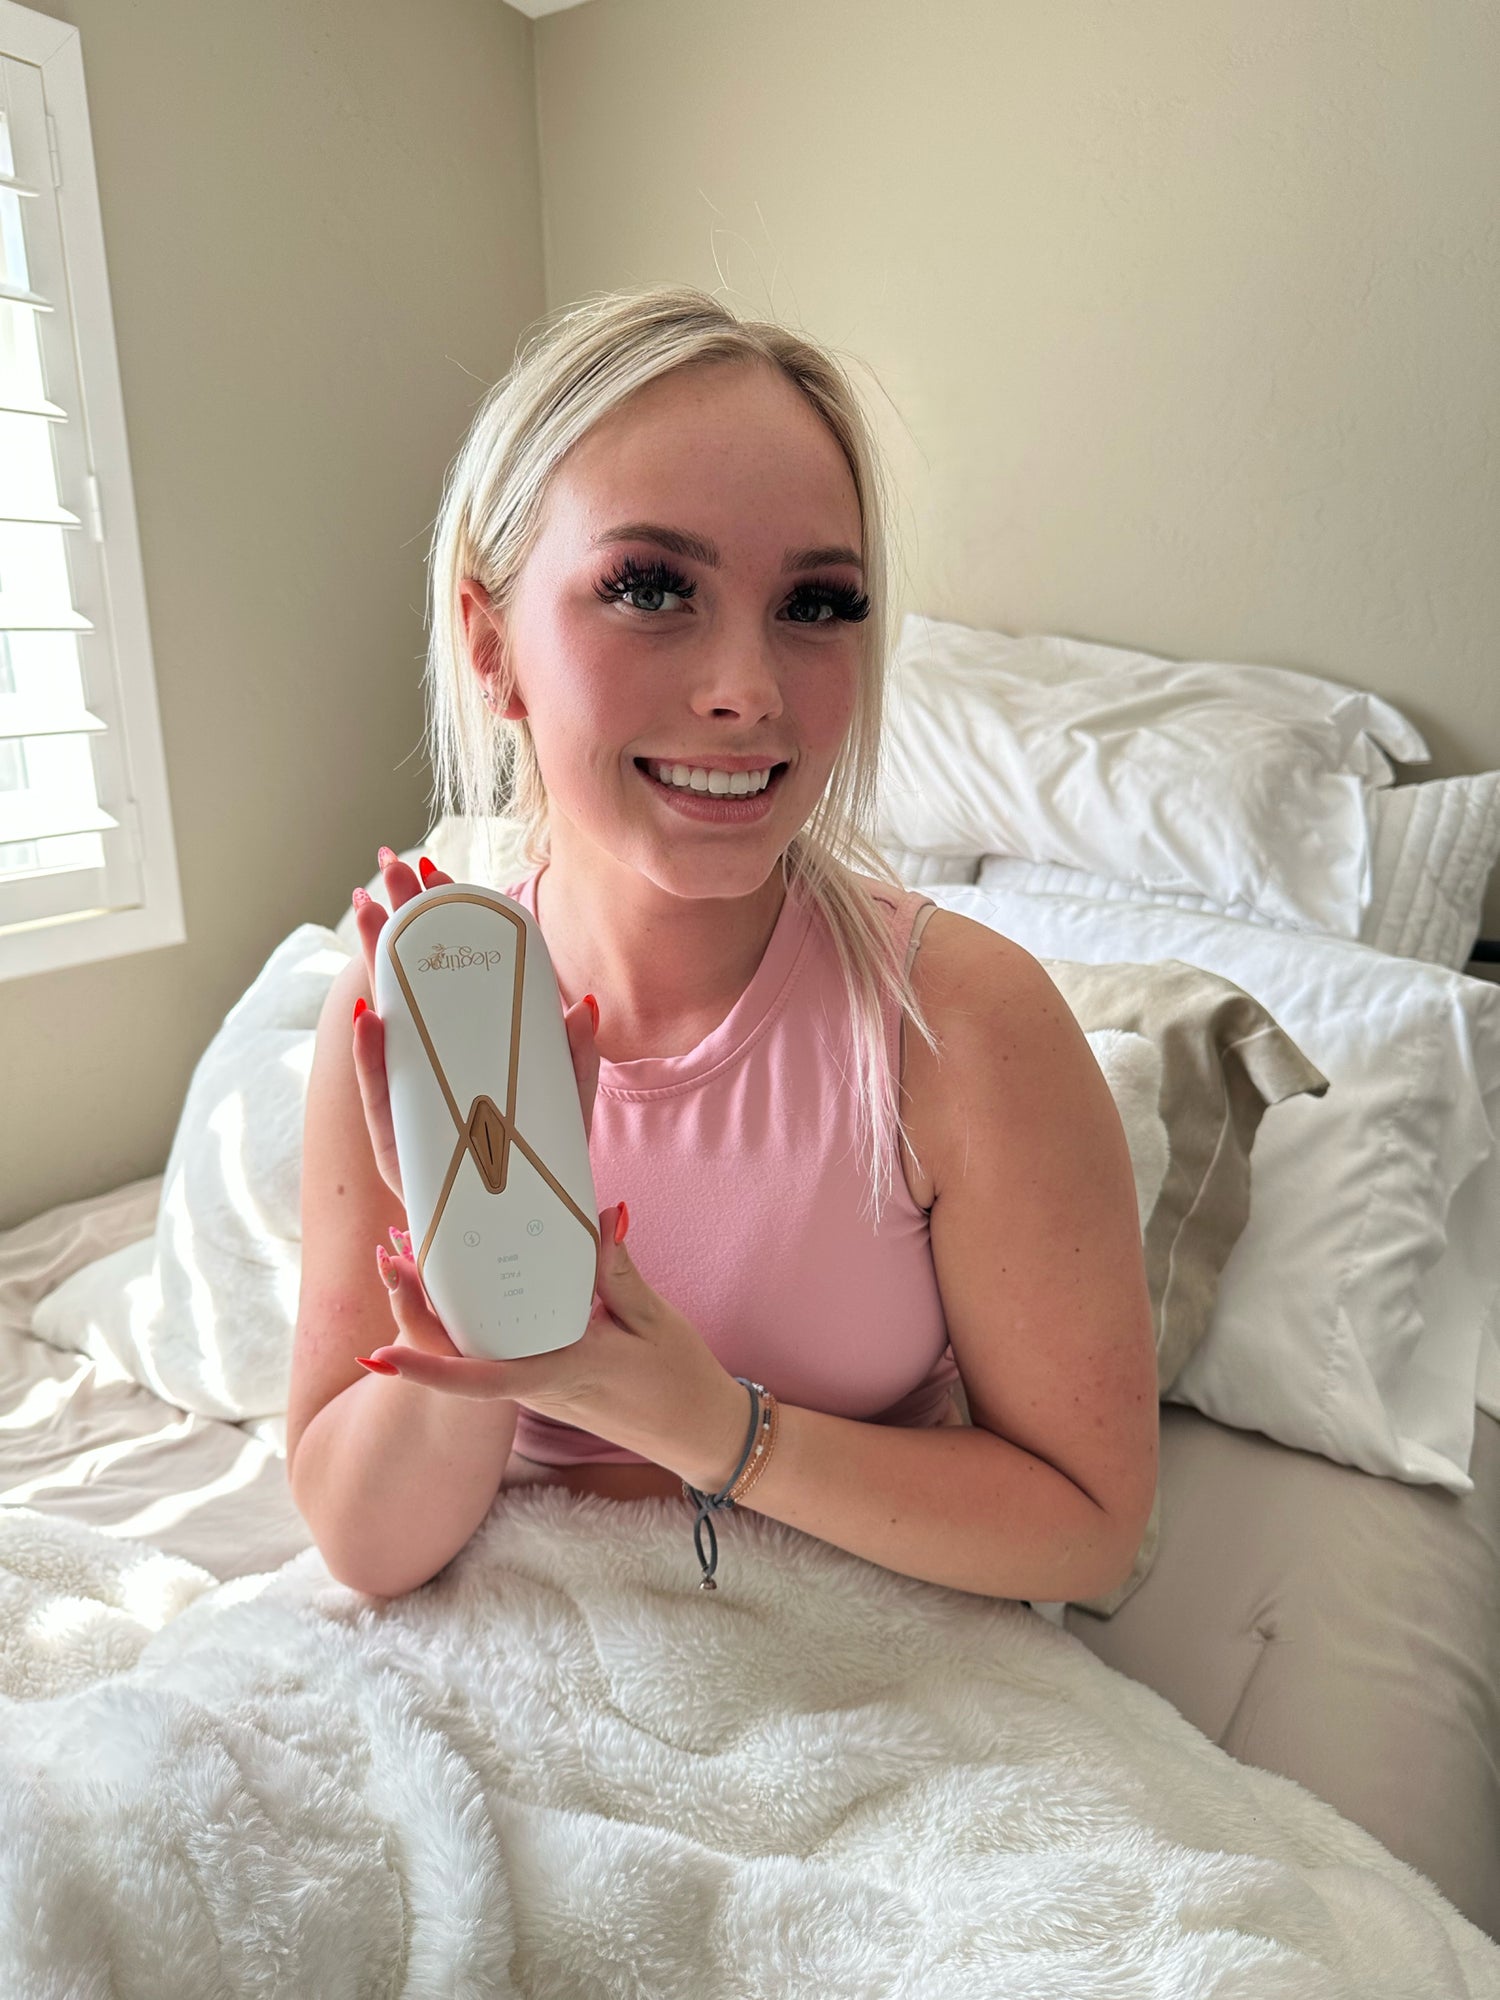 Load video: Real Video Review by Maddy after using the Elegtime IPL Hair Removal Handset.